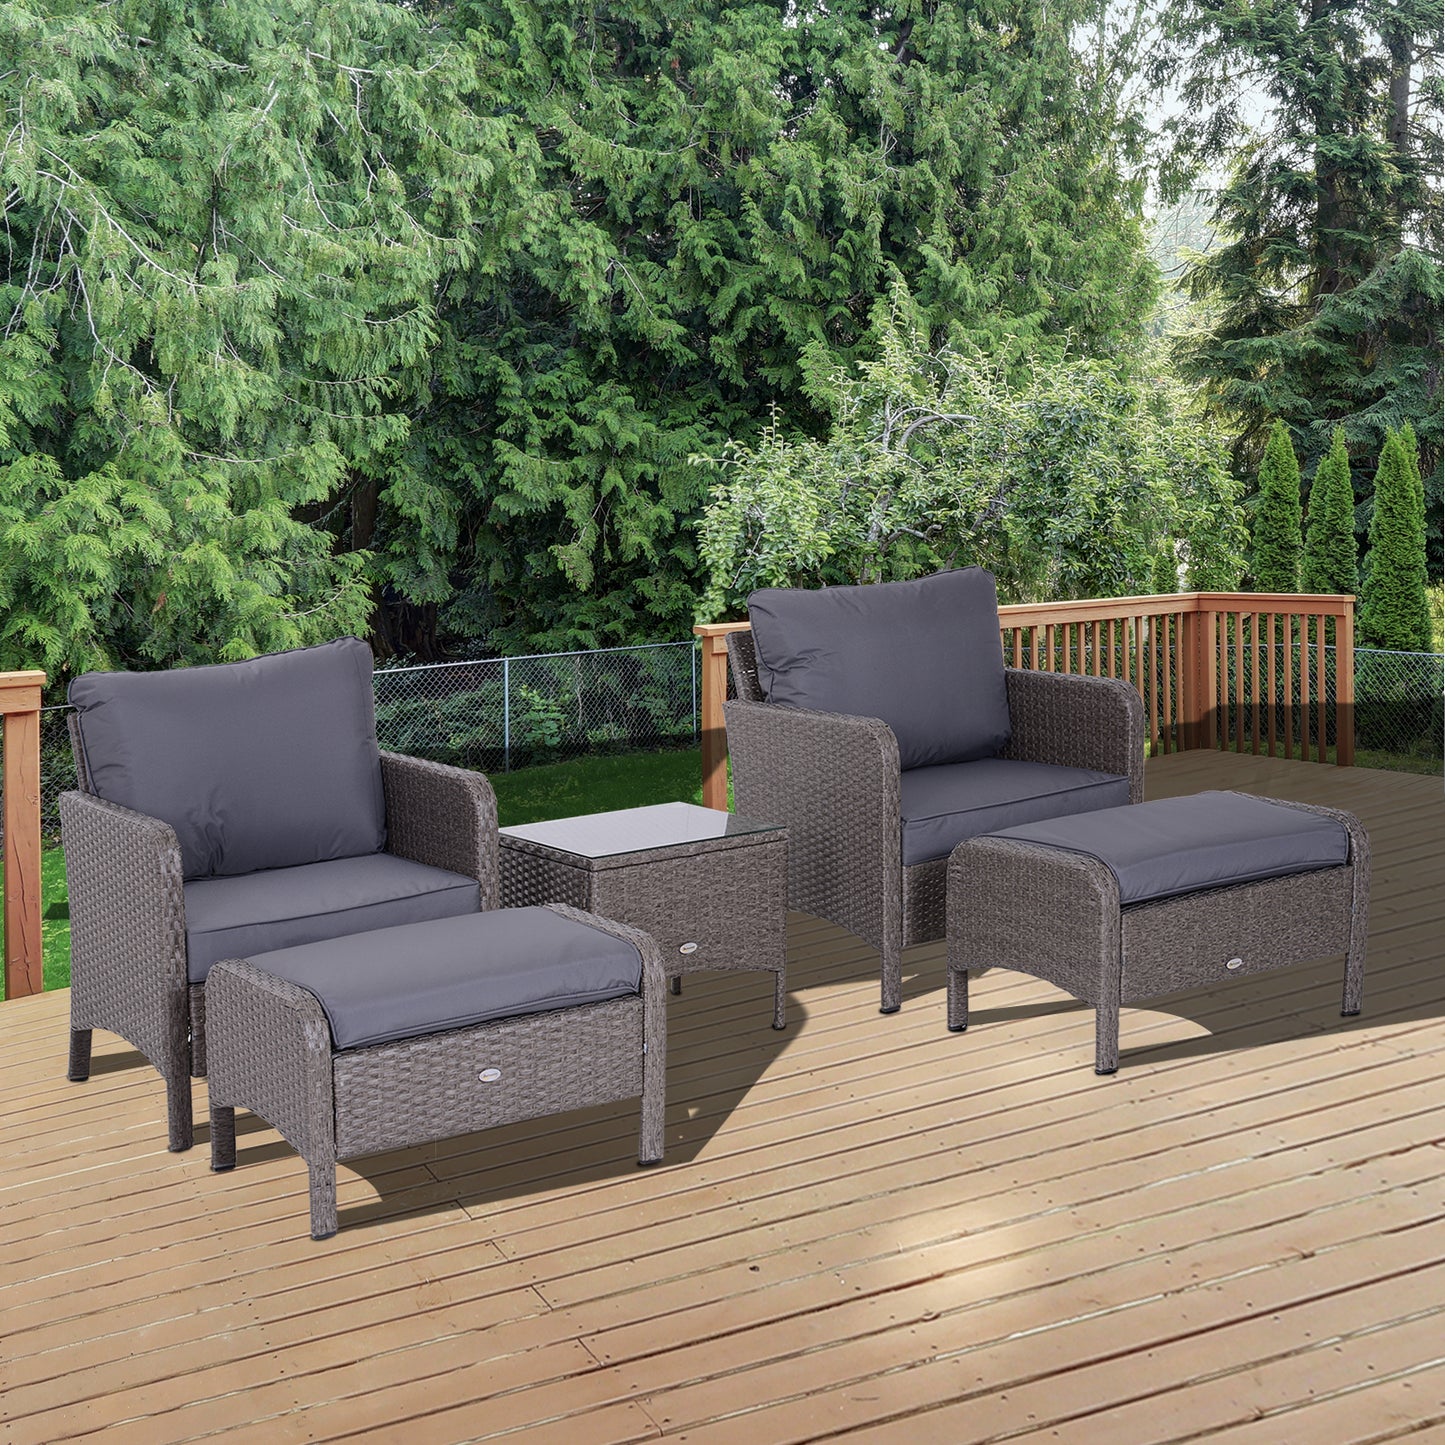 Outsunny 2 Seater Rattan Furniture Set, Steel Frame-Grey